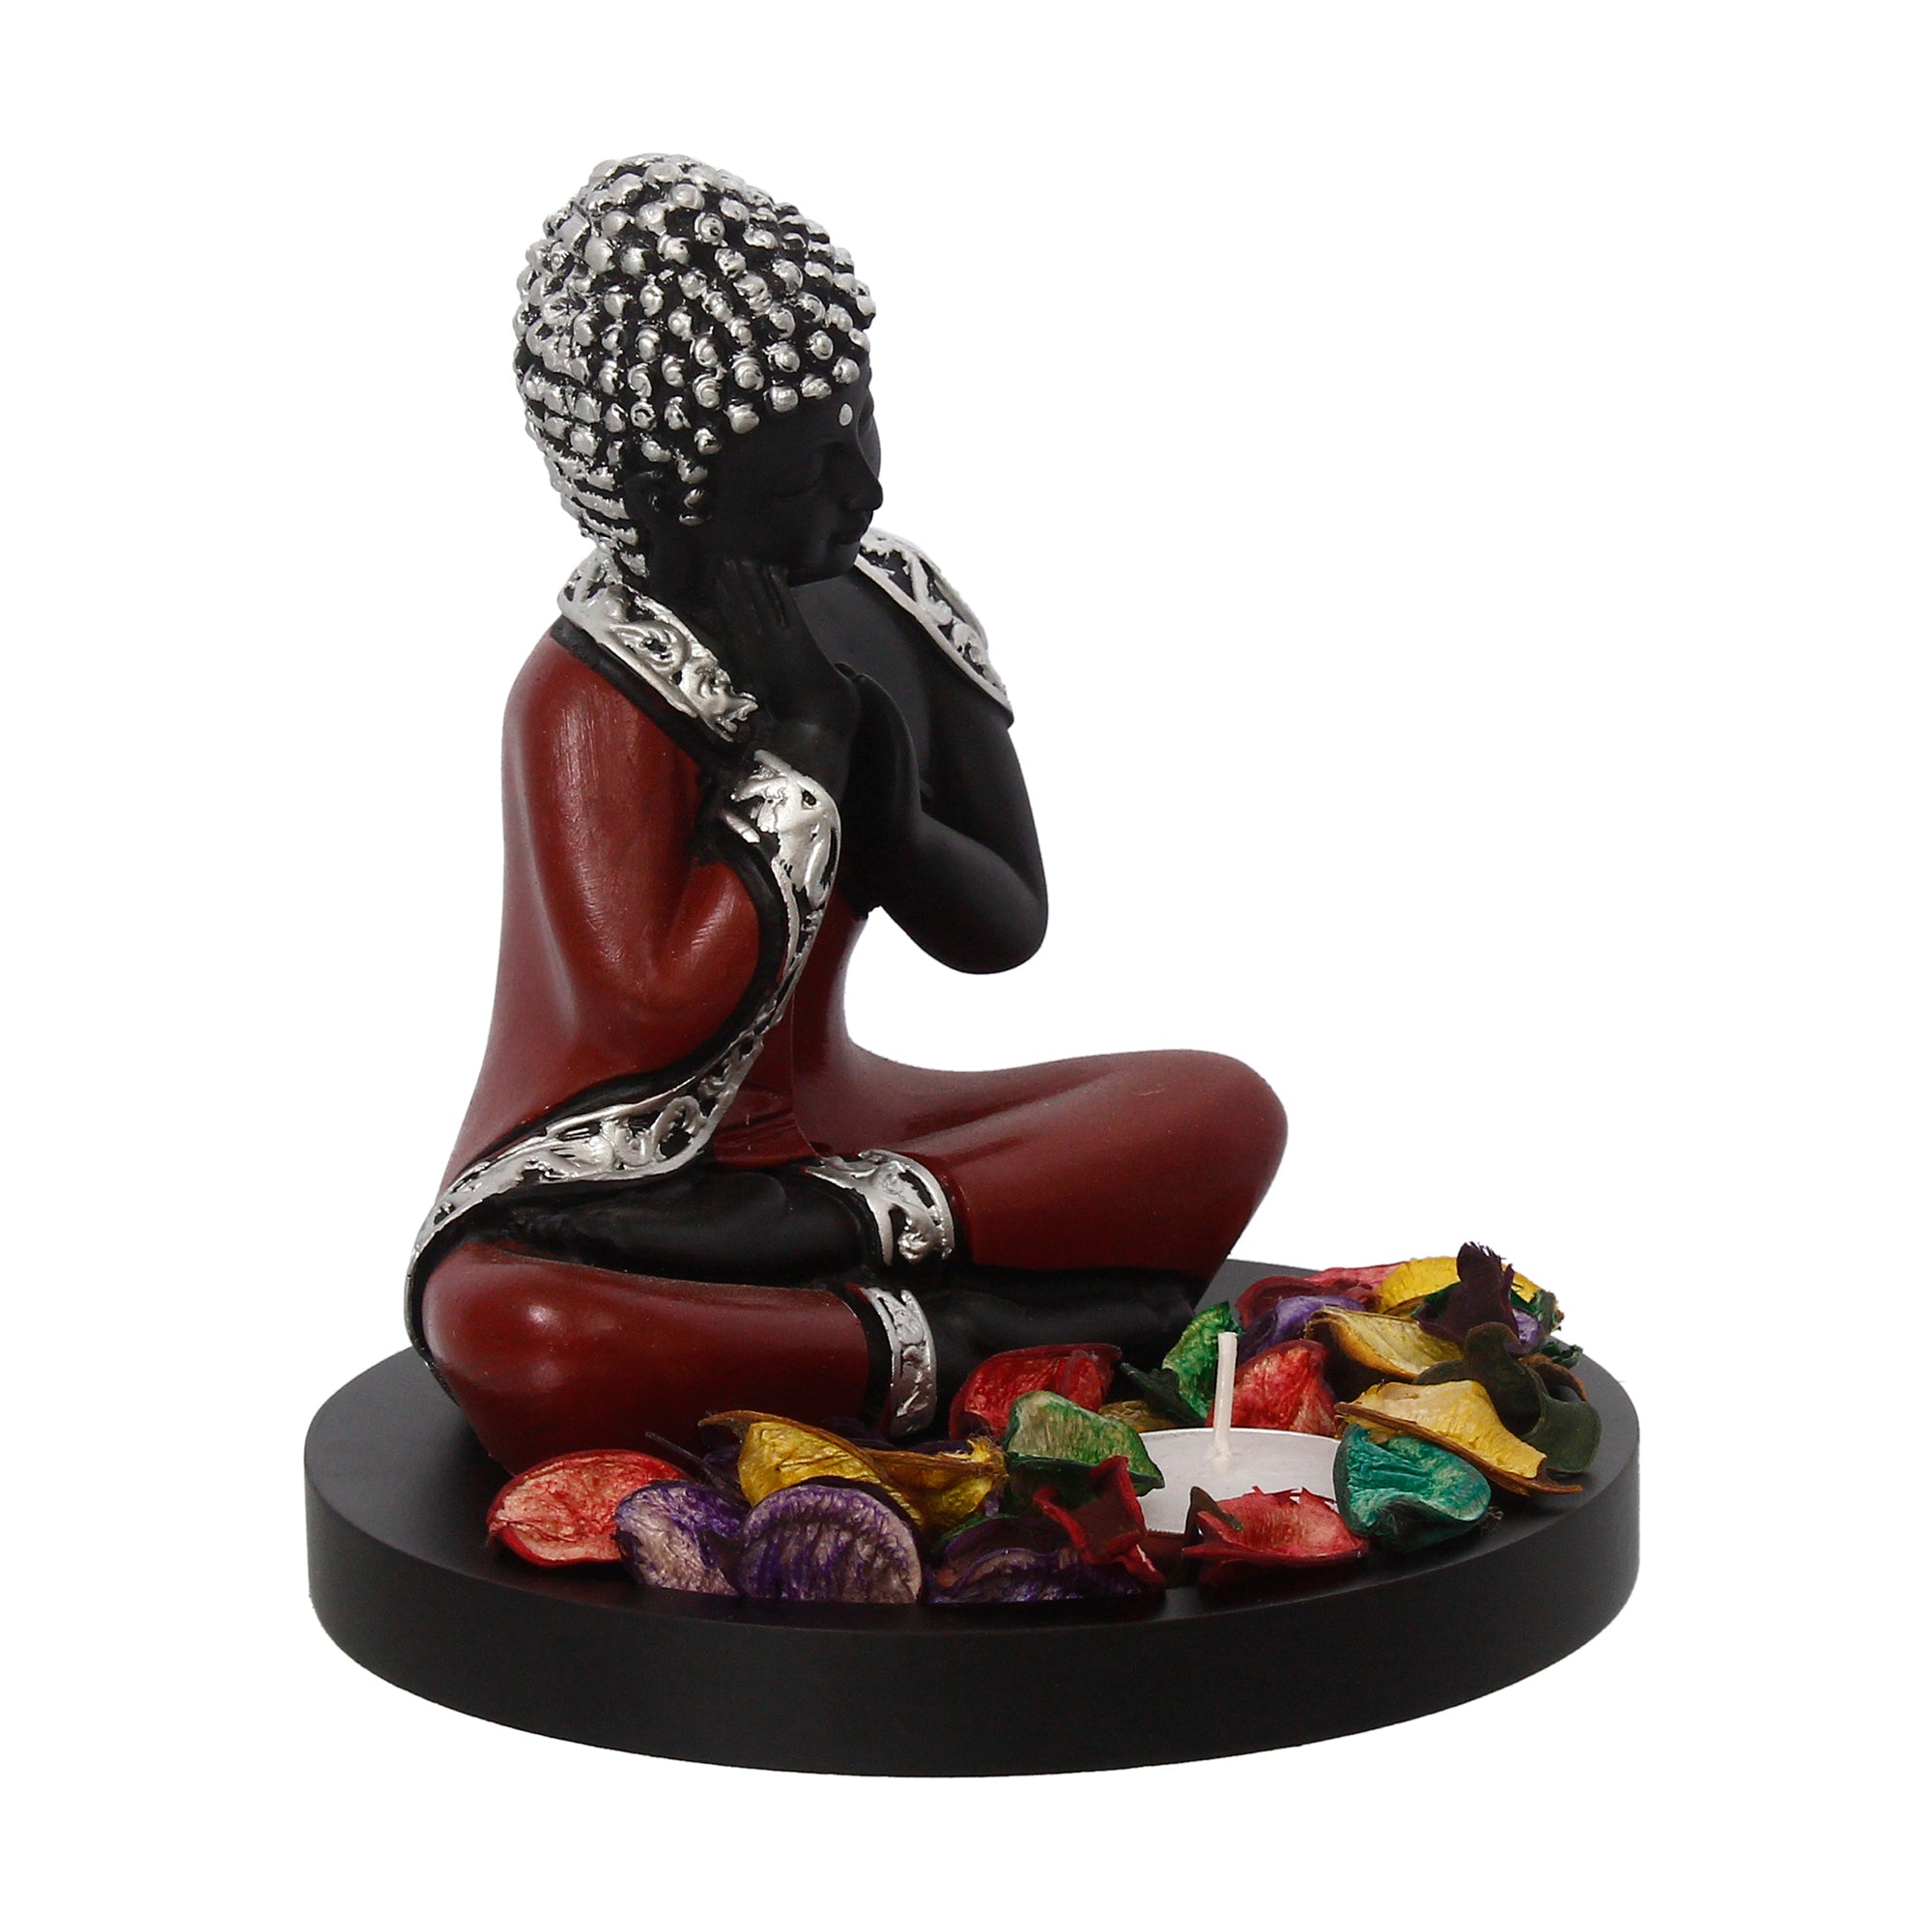 Polyresin Antique Finish Handcrafted Thinking Buddha Statue with Wooden Base, Fragranced Petals and Tealight (Red, Black and Silver) 4